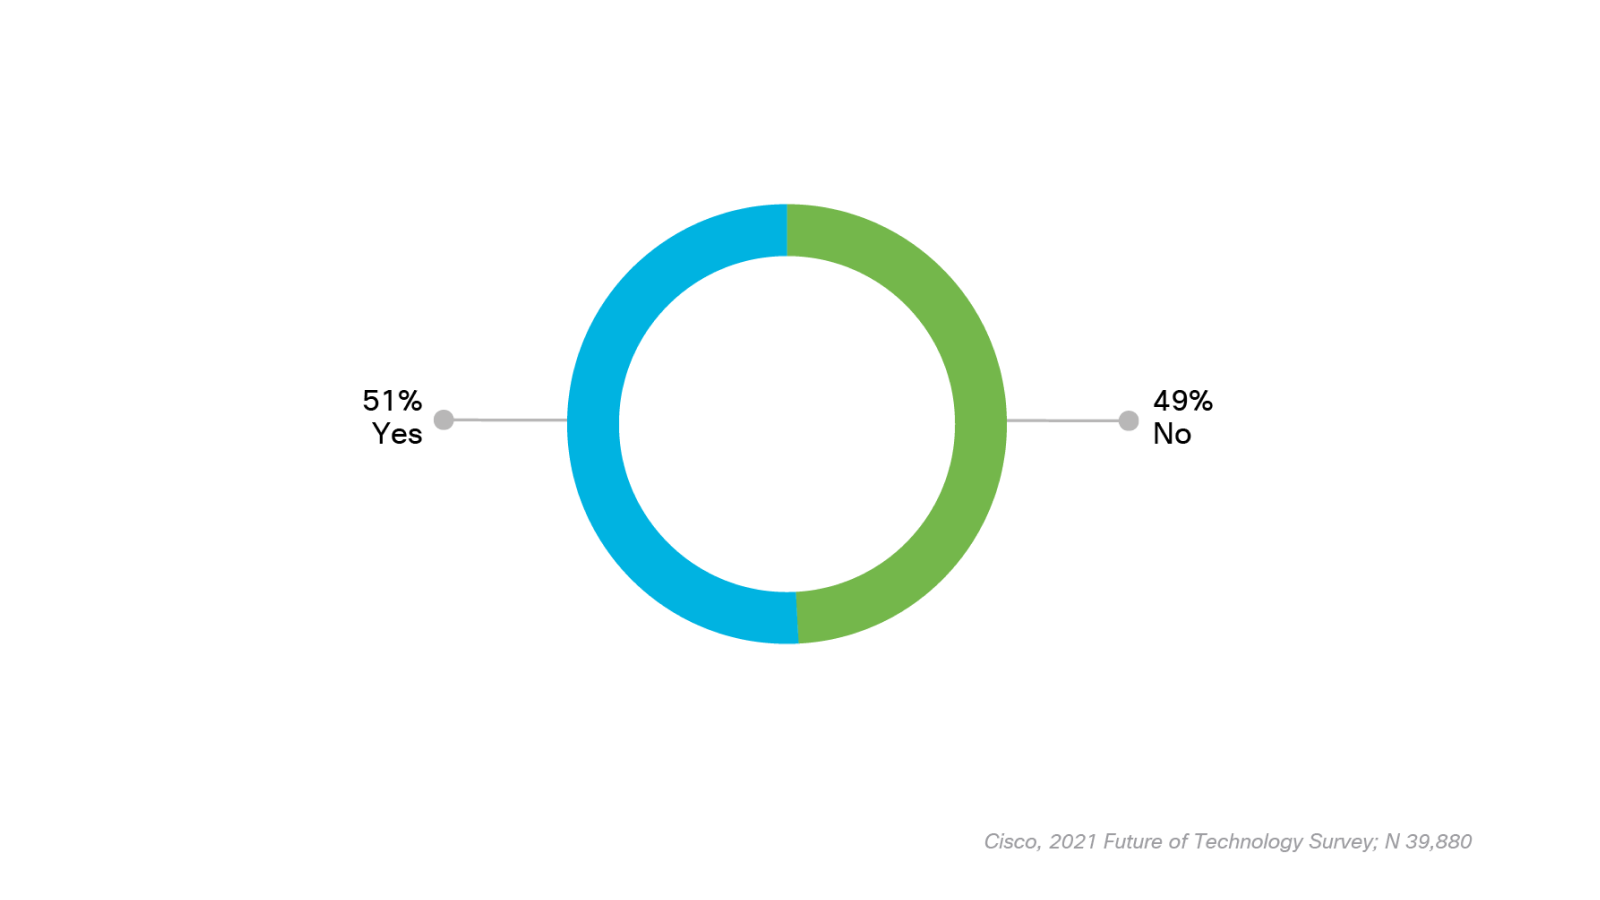 Graph showing percentage of respondents who have had trouble keeping employees connected. The chart shows that 51% said yes, 49% said no.